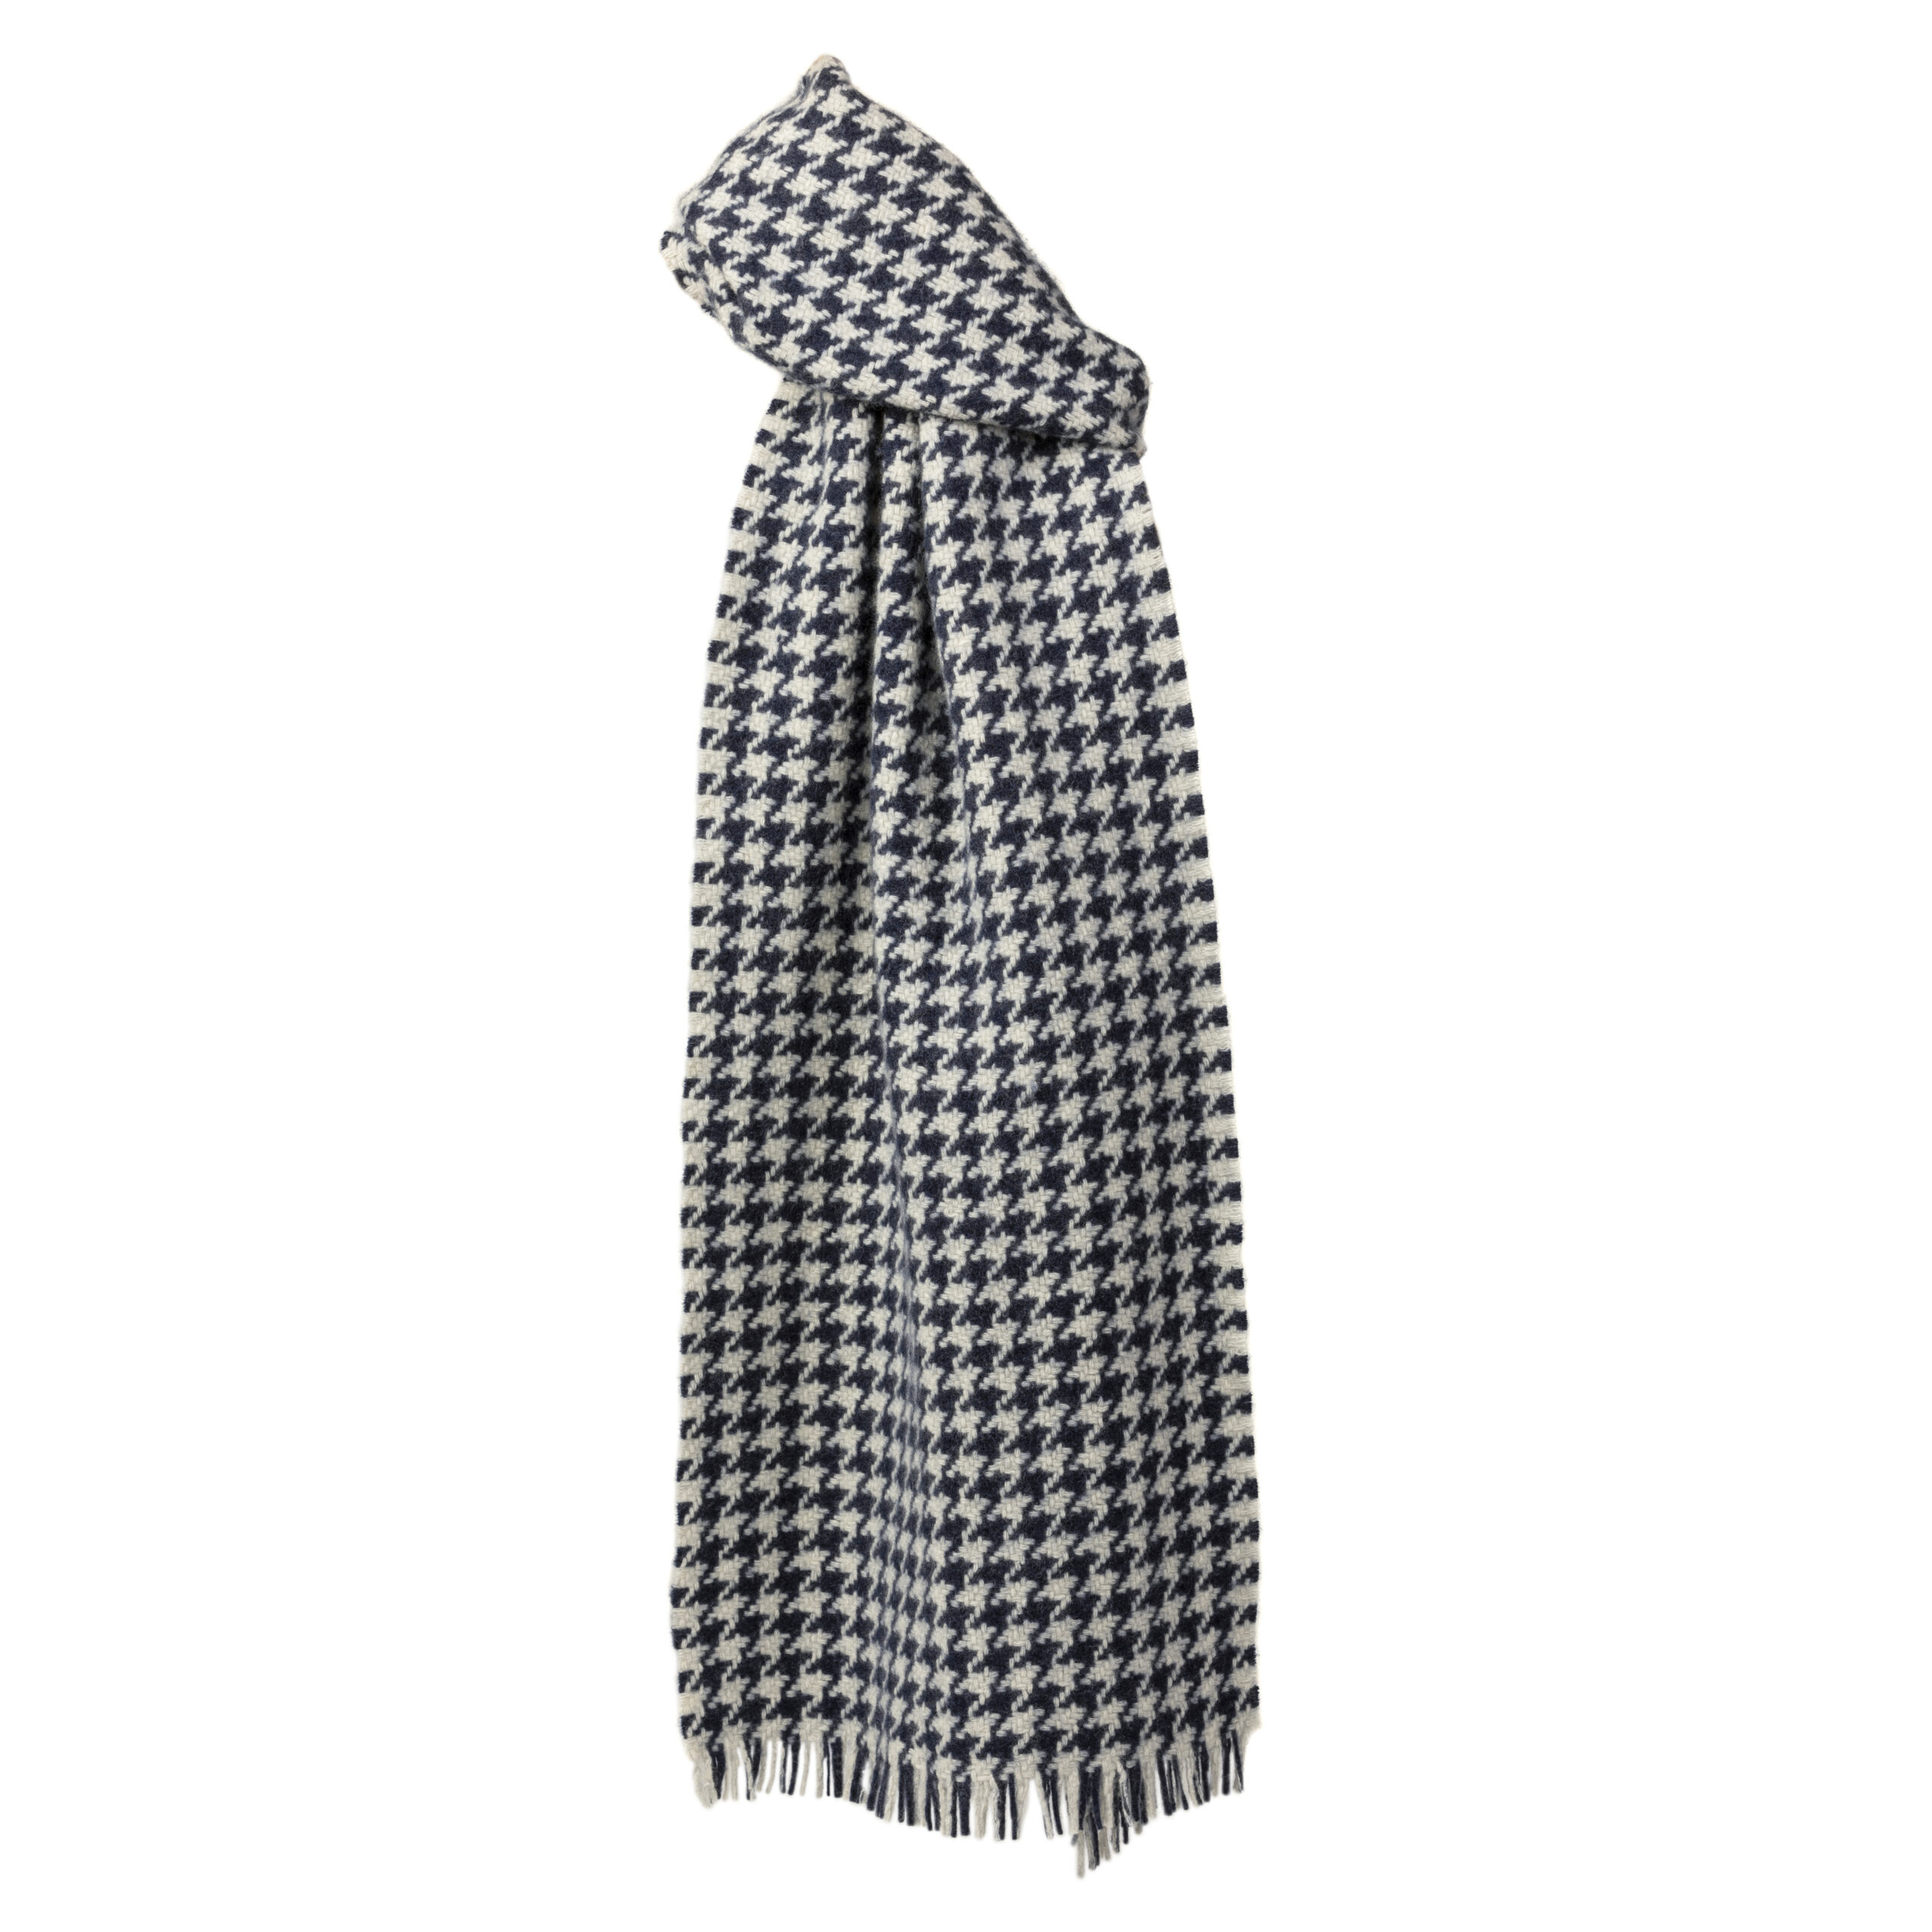 Deluxe Navy Houndstooth Cashmere Scarf